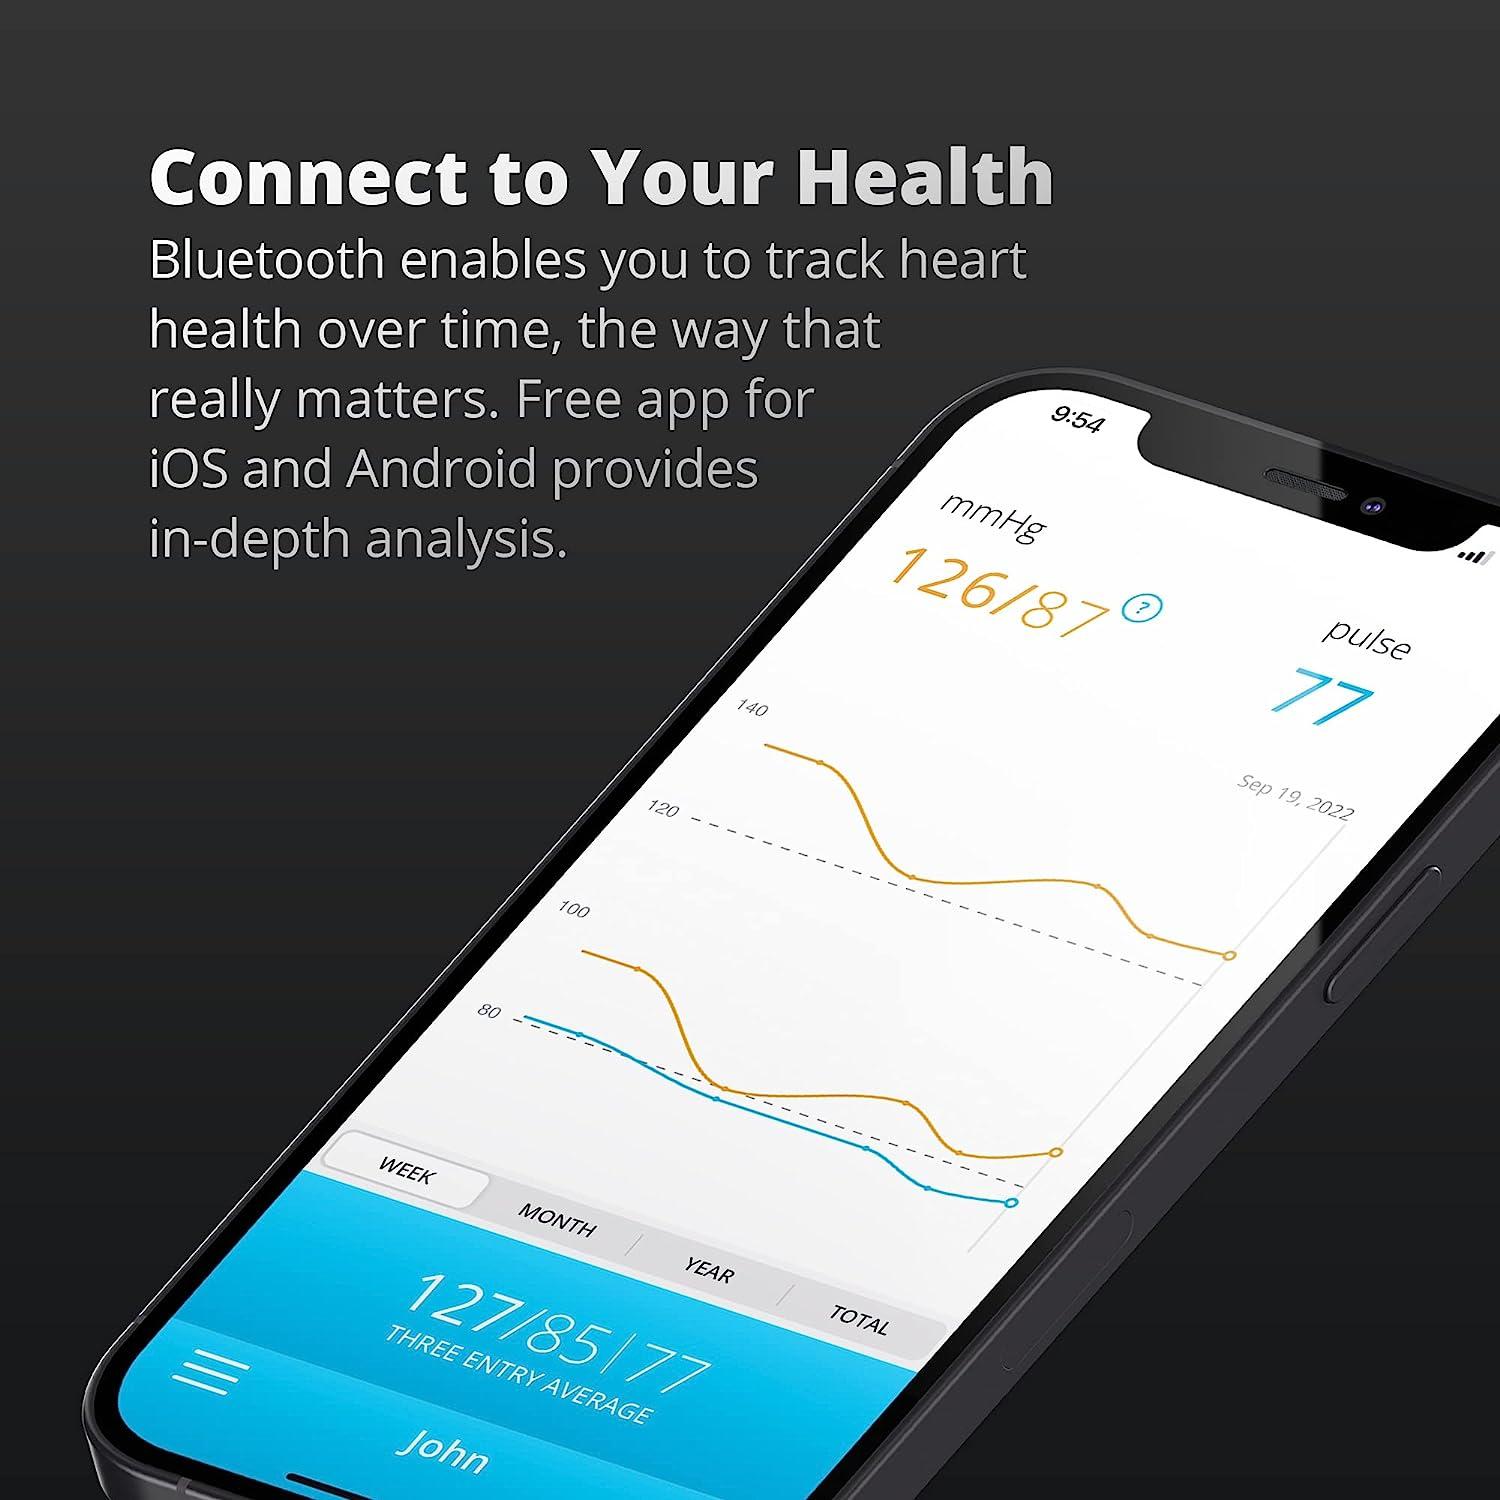 Greater Goods Smart Digital Wrist Blood Pressure Monitor, for  Home/On-The-Go, with iPhone or Android Connectivity via Bluetooth and  Premium Cuff, Designed in St. Louis 